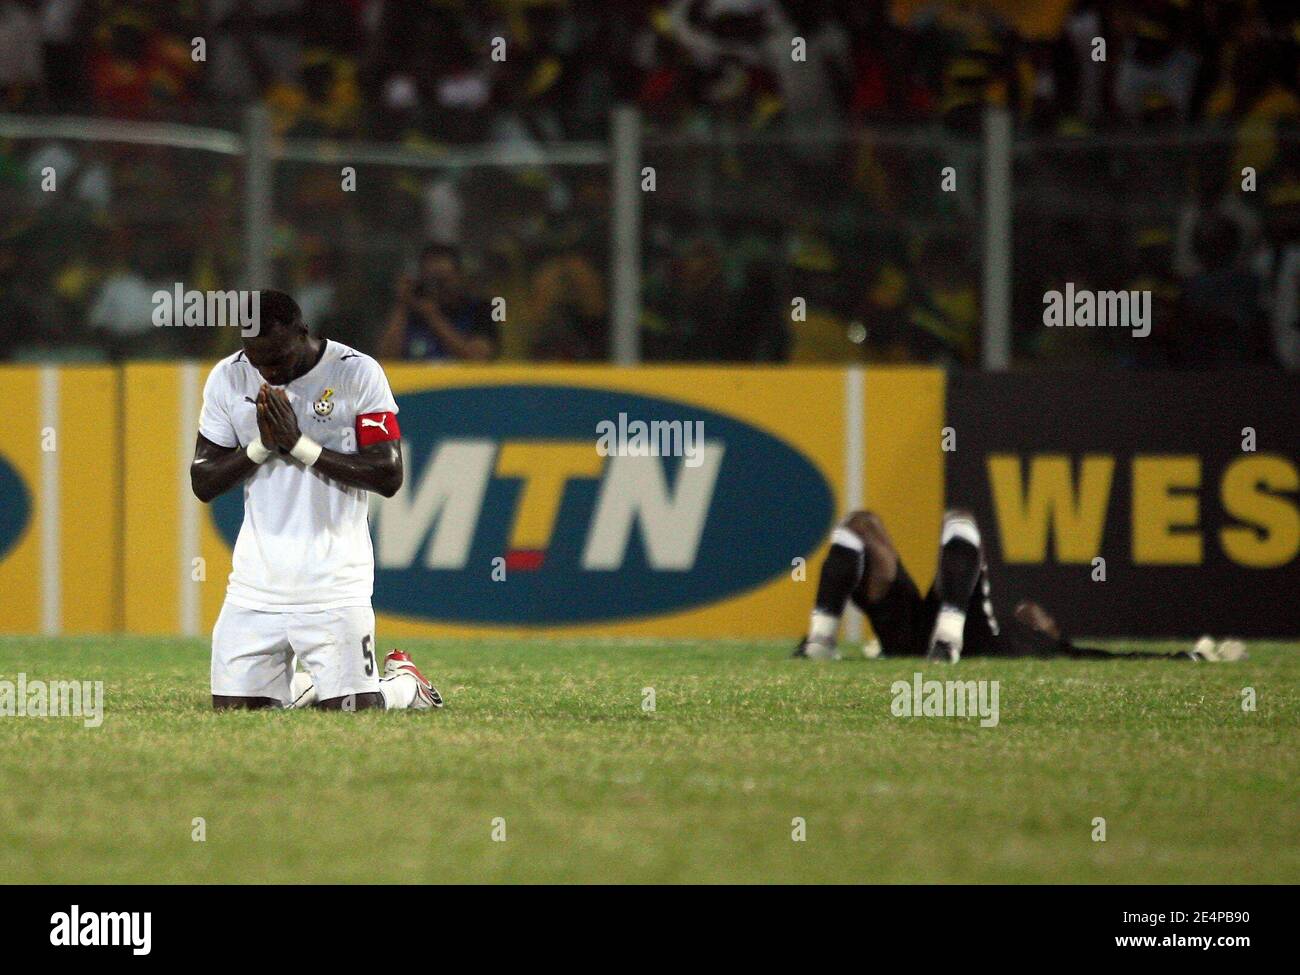 Ghana's captain John Mensah celebrates after his victory during the African Cup of Nations soccer match, Ghana vs Morocco in Accra, Ghana on January 28, 2008. Ghana won the game 2-0. Photo by Steeve McMay/Cameleon/ABACAPRESS.COM Stock Photo